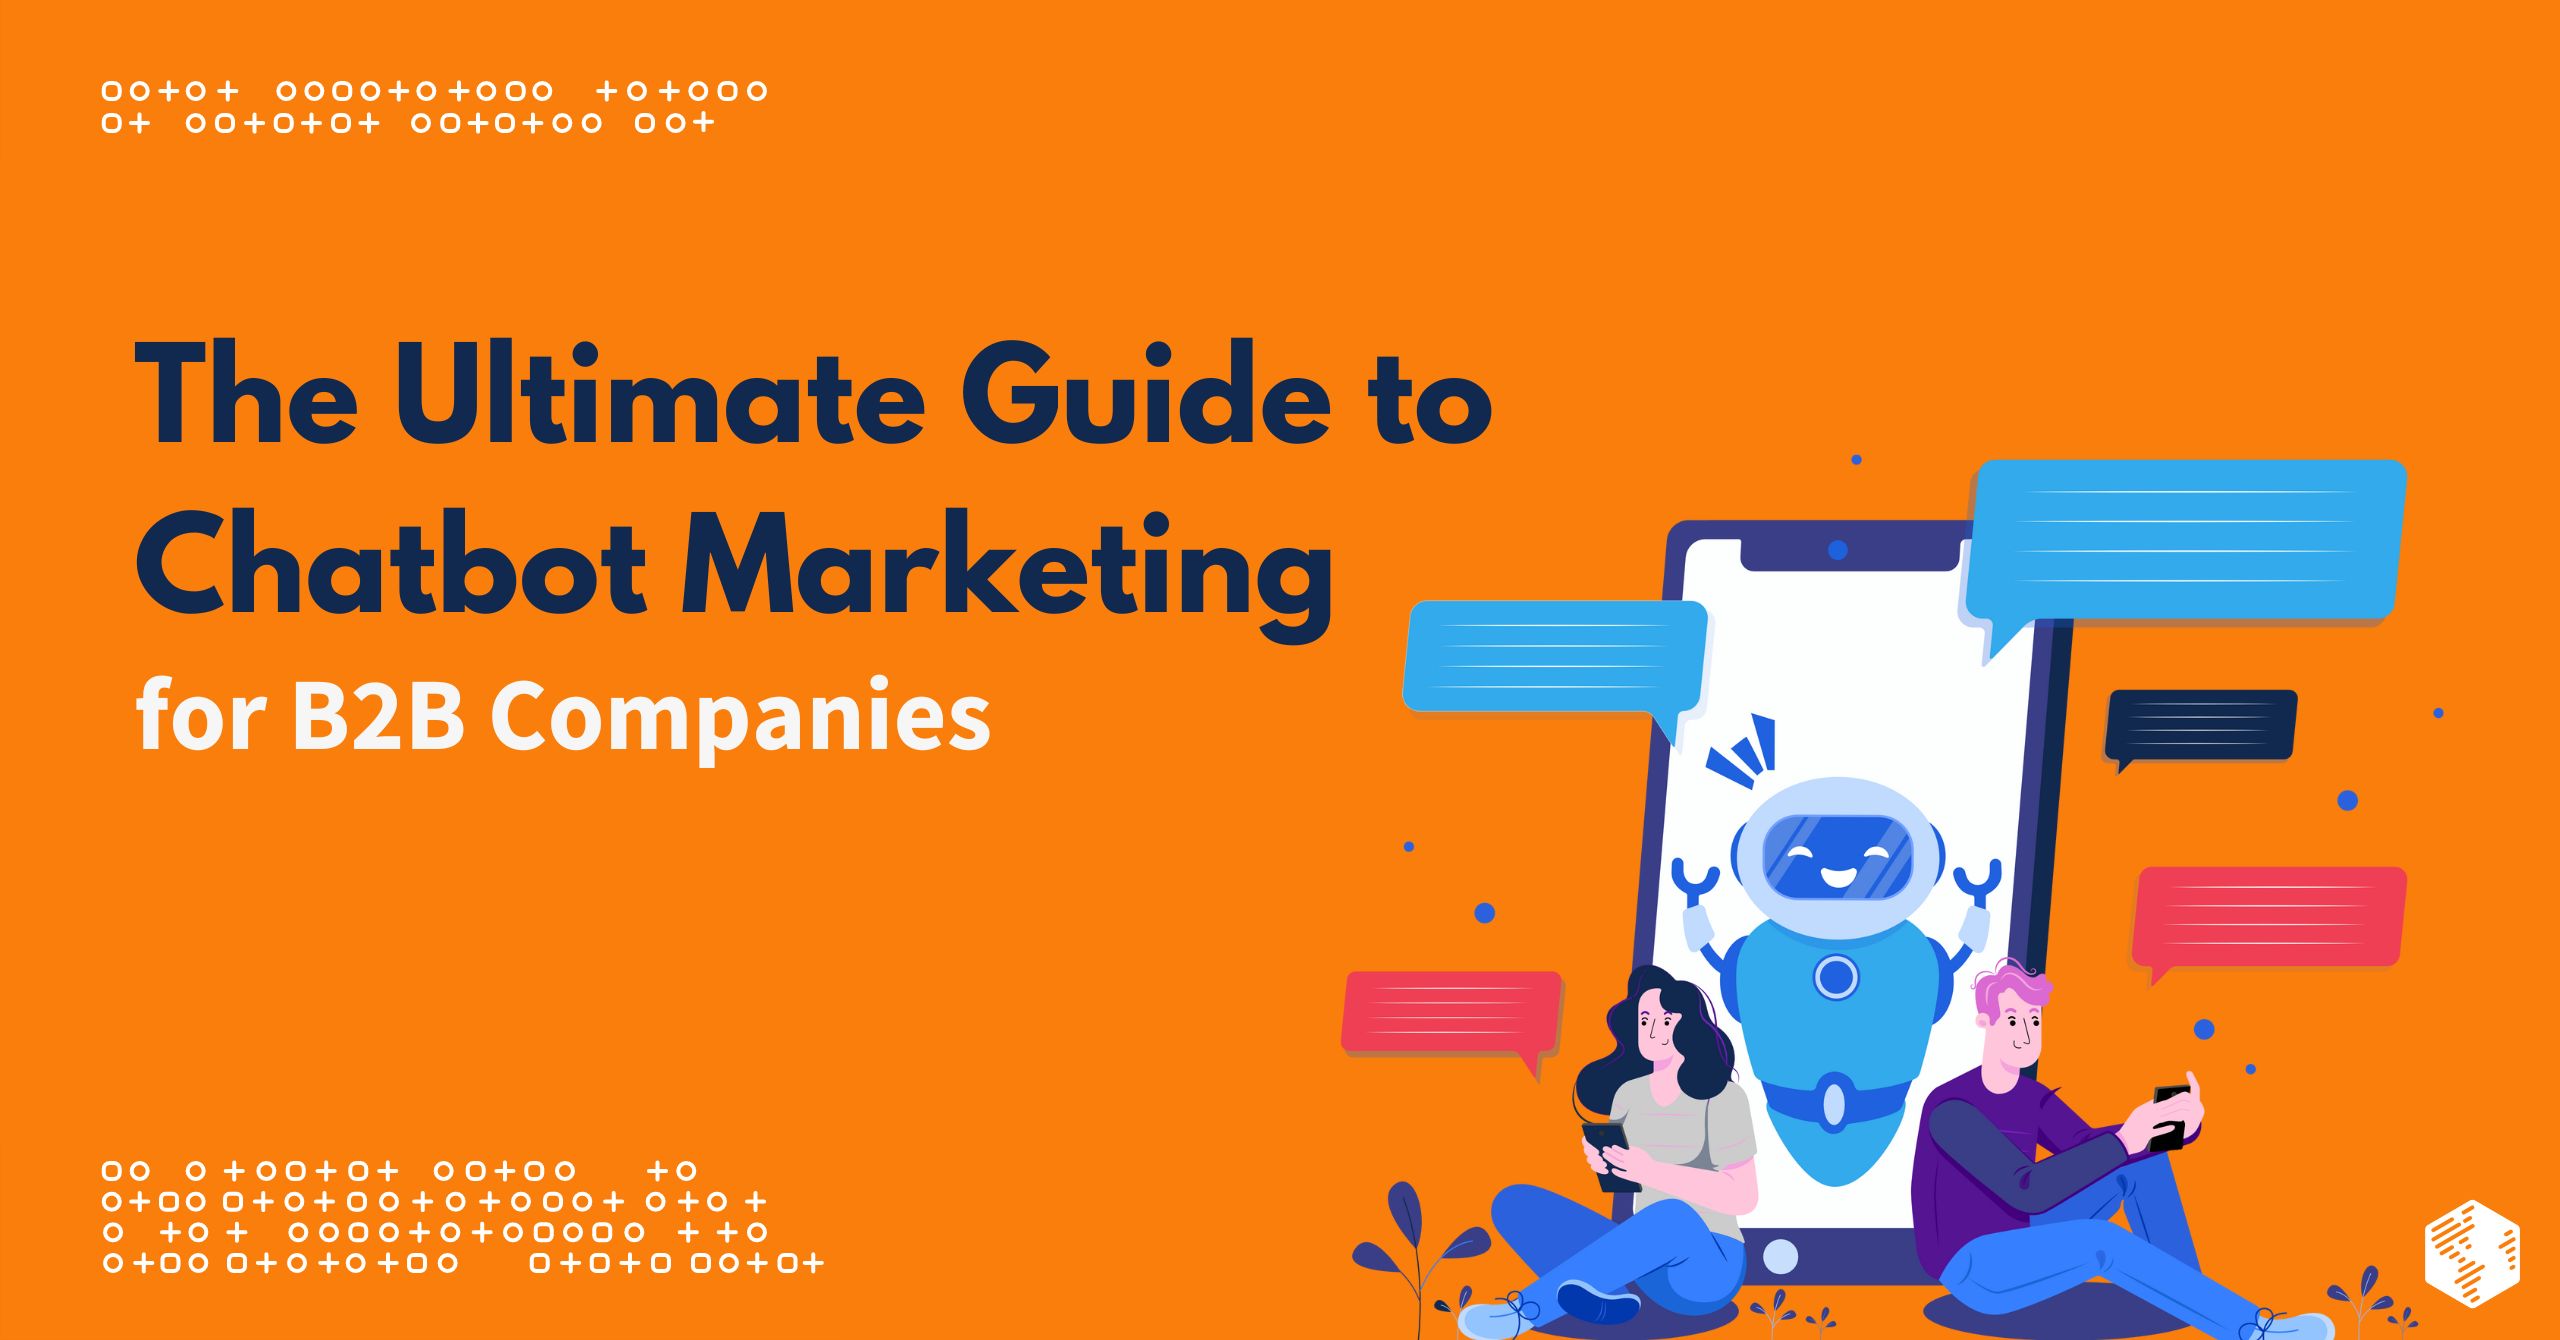 Guide to Chatbots Marketing for B2B Businesses